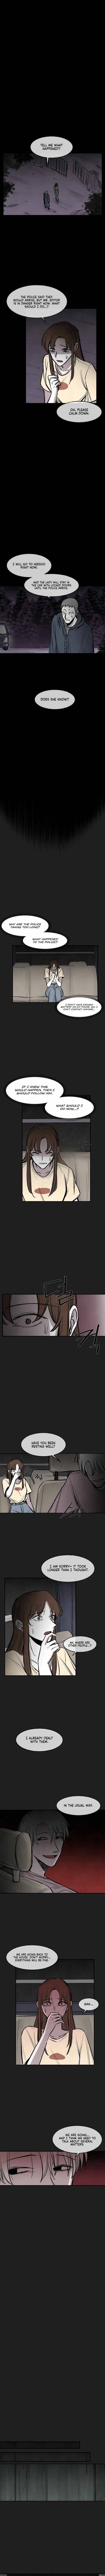 Devil's Editing - Page 3